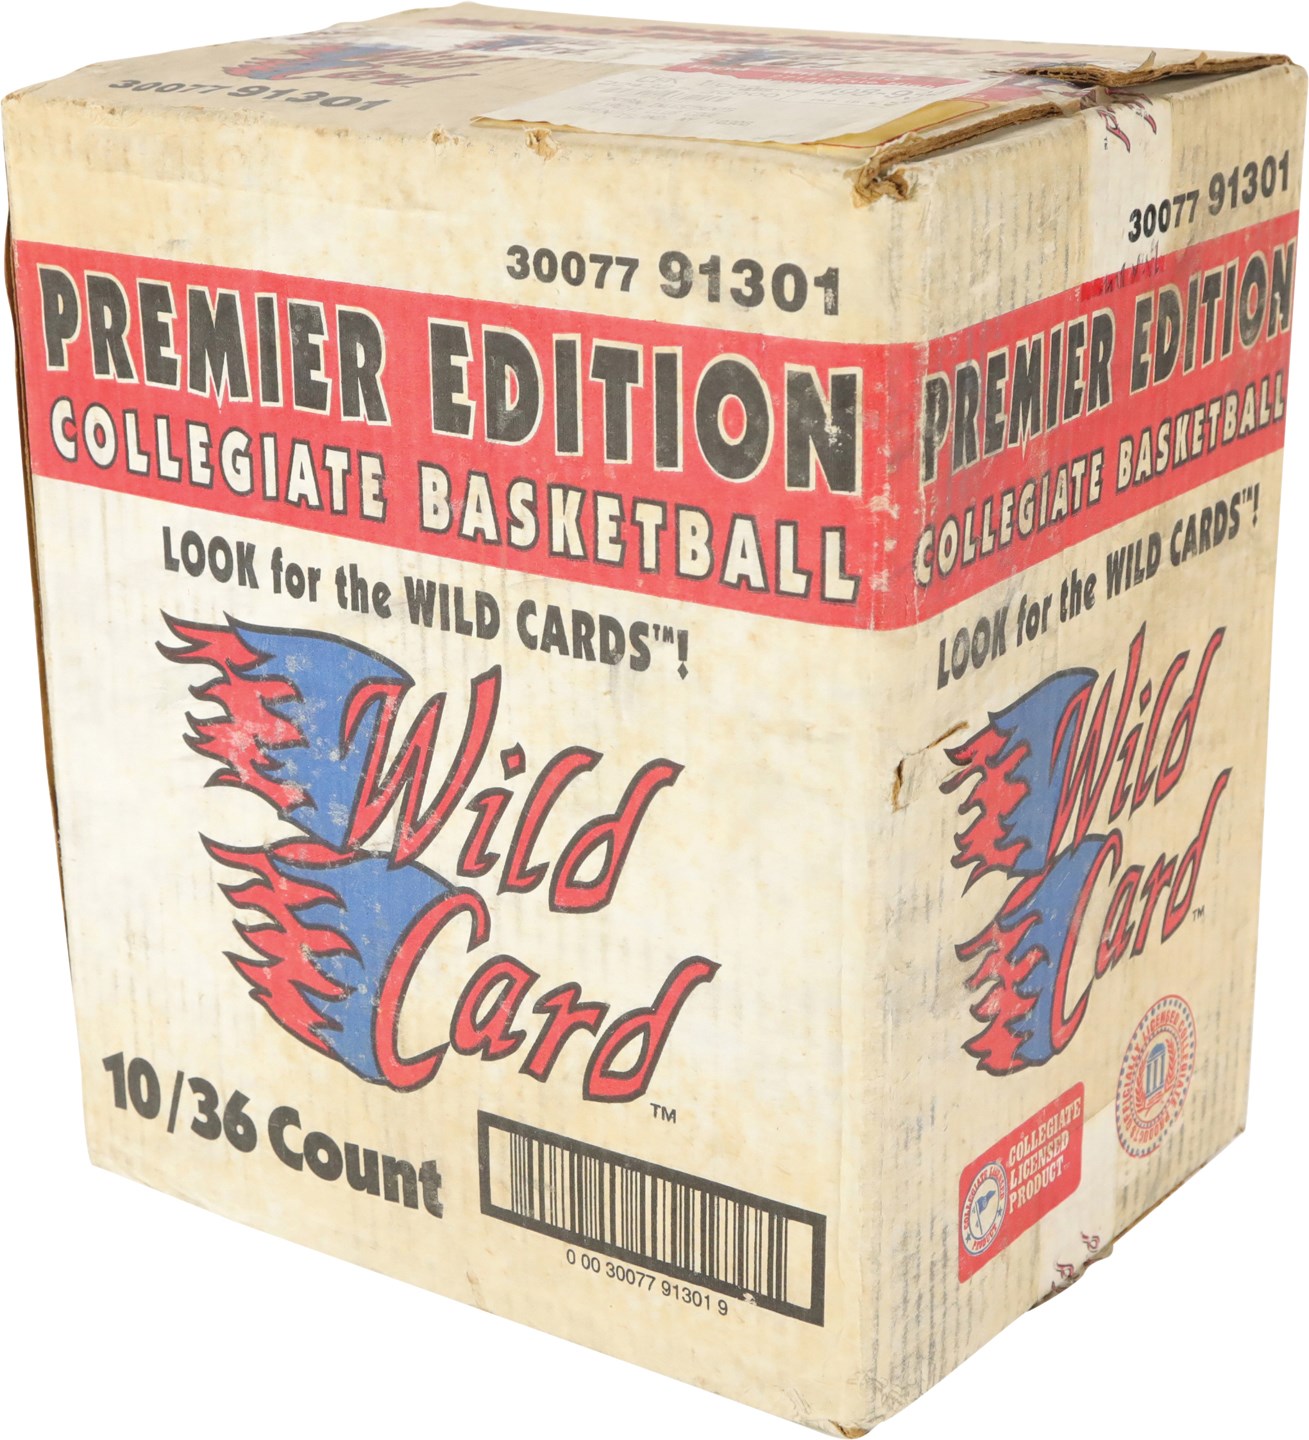 Unopened Boxes, Packs And Cases - 1991 Wild Card Collegiate Basketball Premier Edition Wax Case w/10 Unopened Boxes